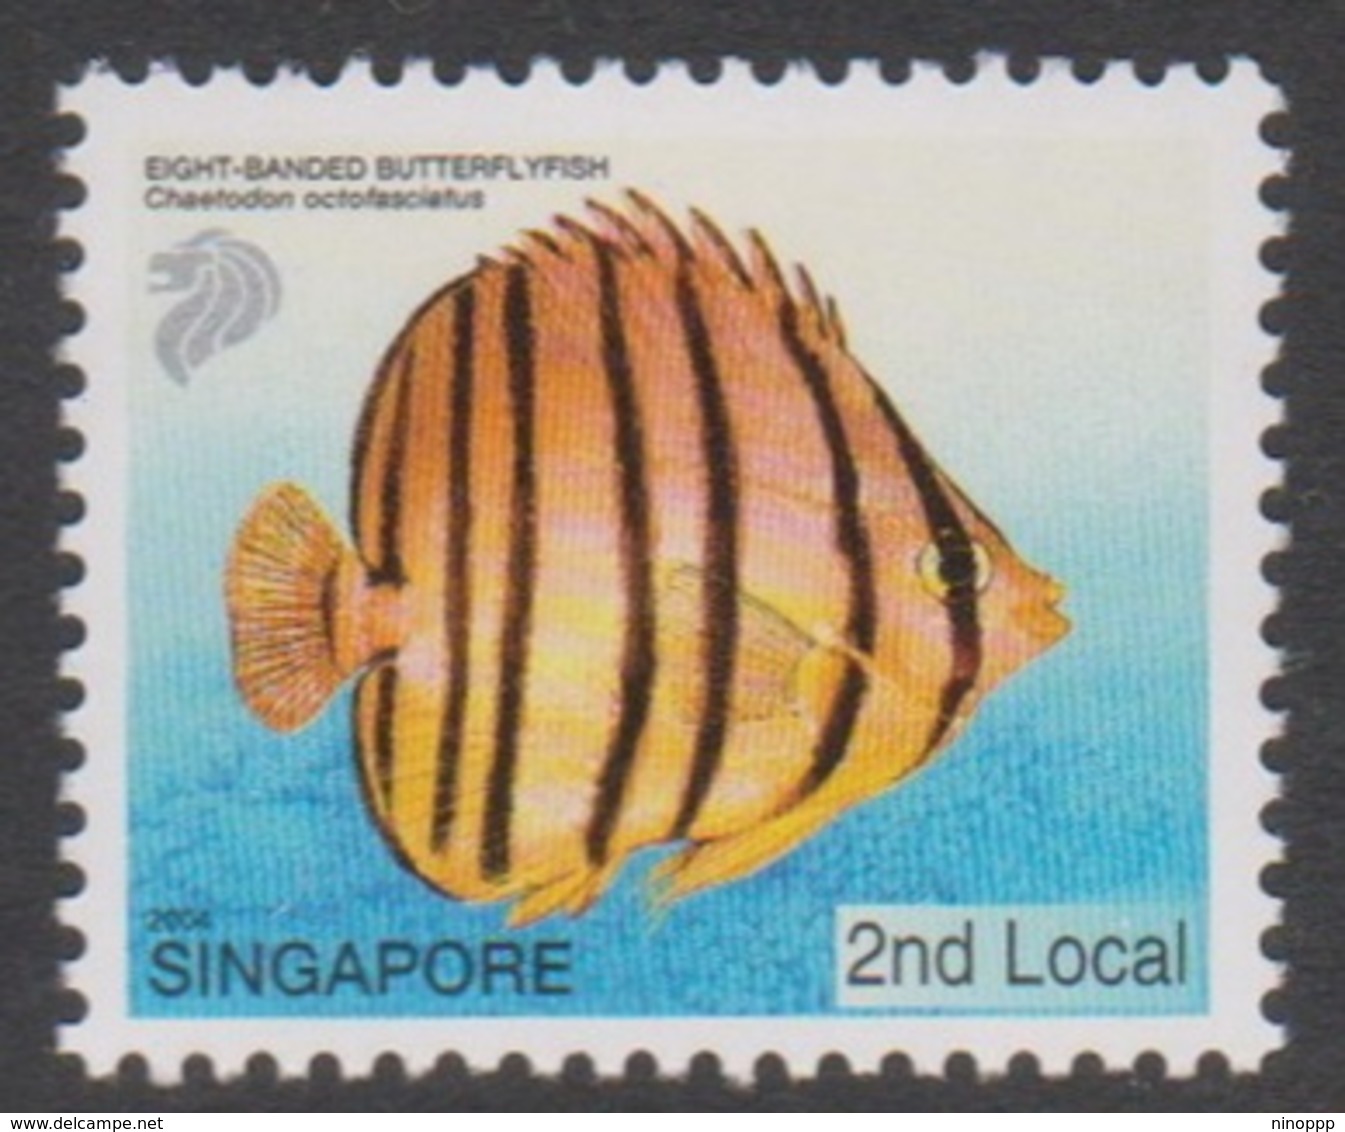 Singapore 1048 2004 Tropical Fish 40c Rainbow Butterflyfish,2 Nd Local, Mint Never Hinged - Singapore (1959-...)